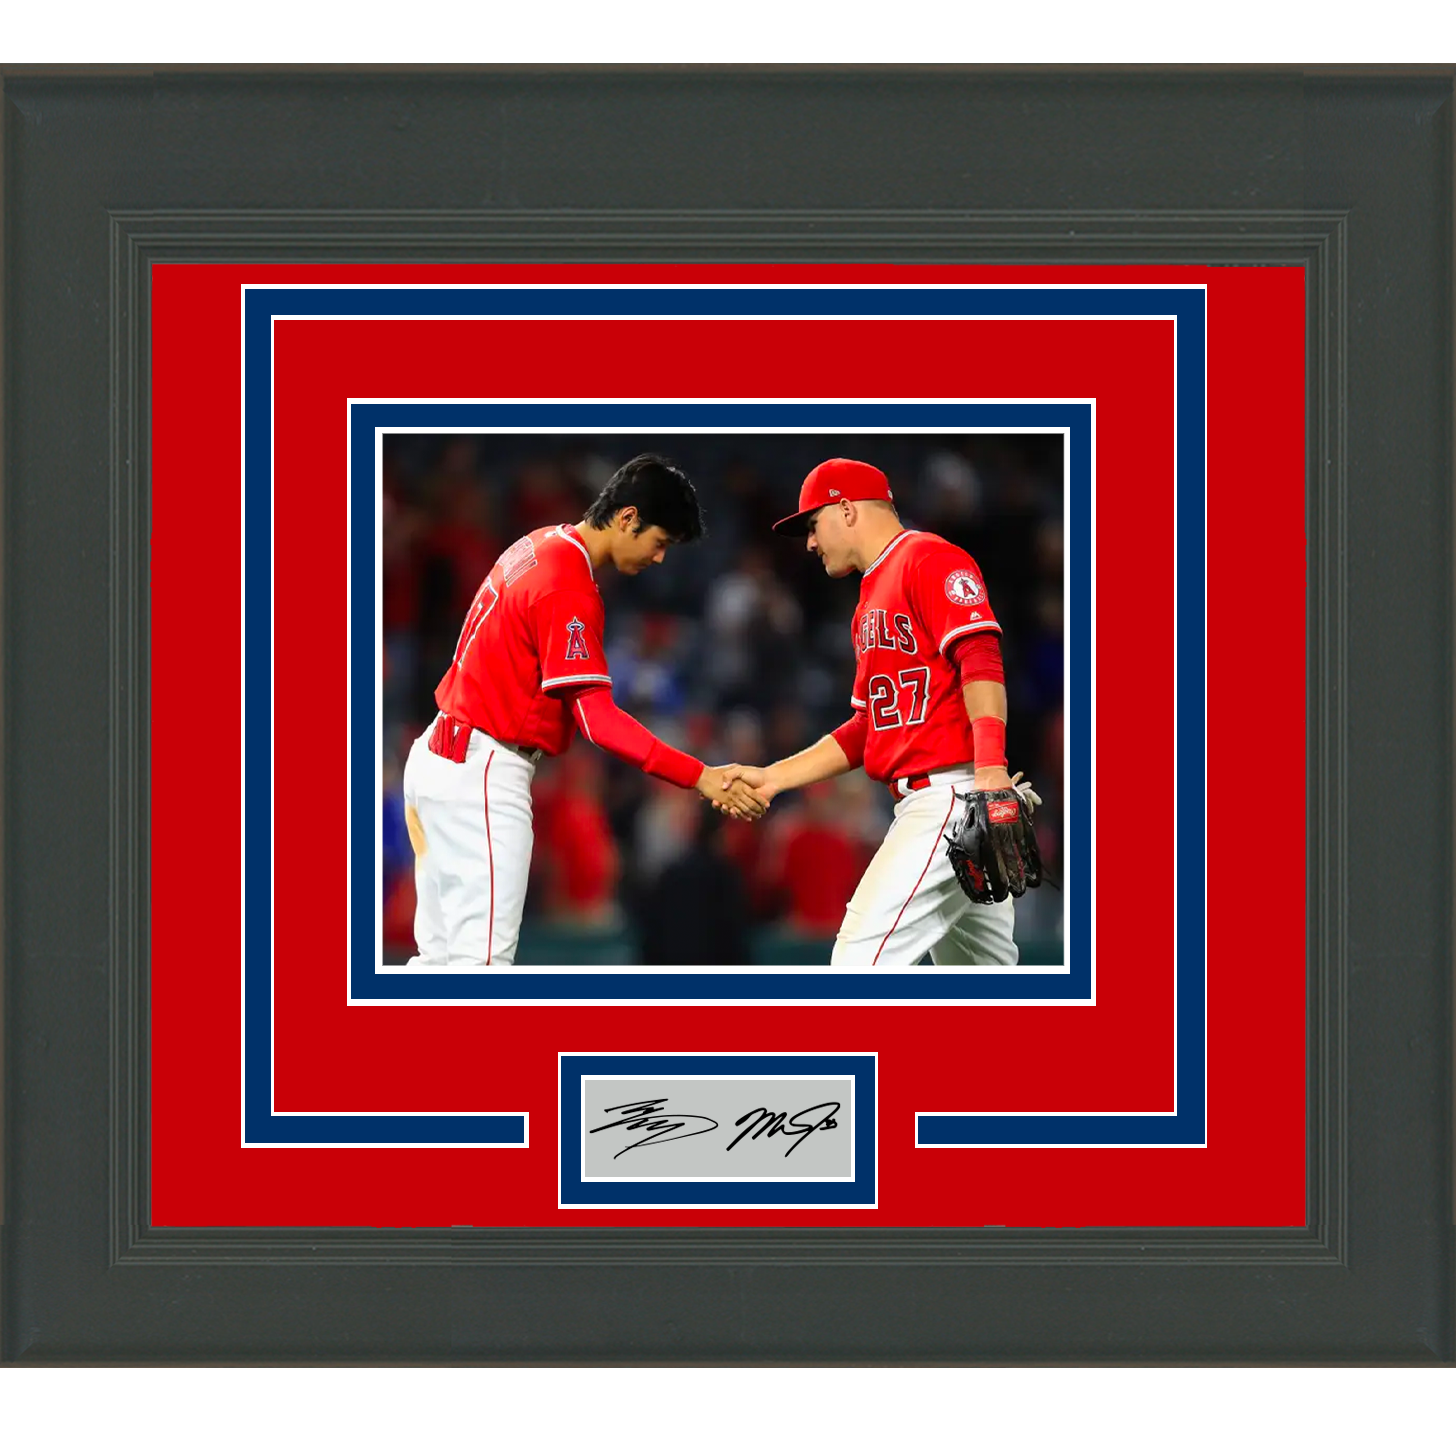 Mike Trout Framed Signed Jersey PSA/DNA Autographed Los Angeles Angels